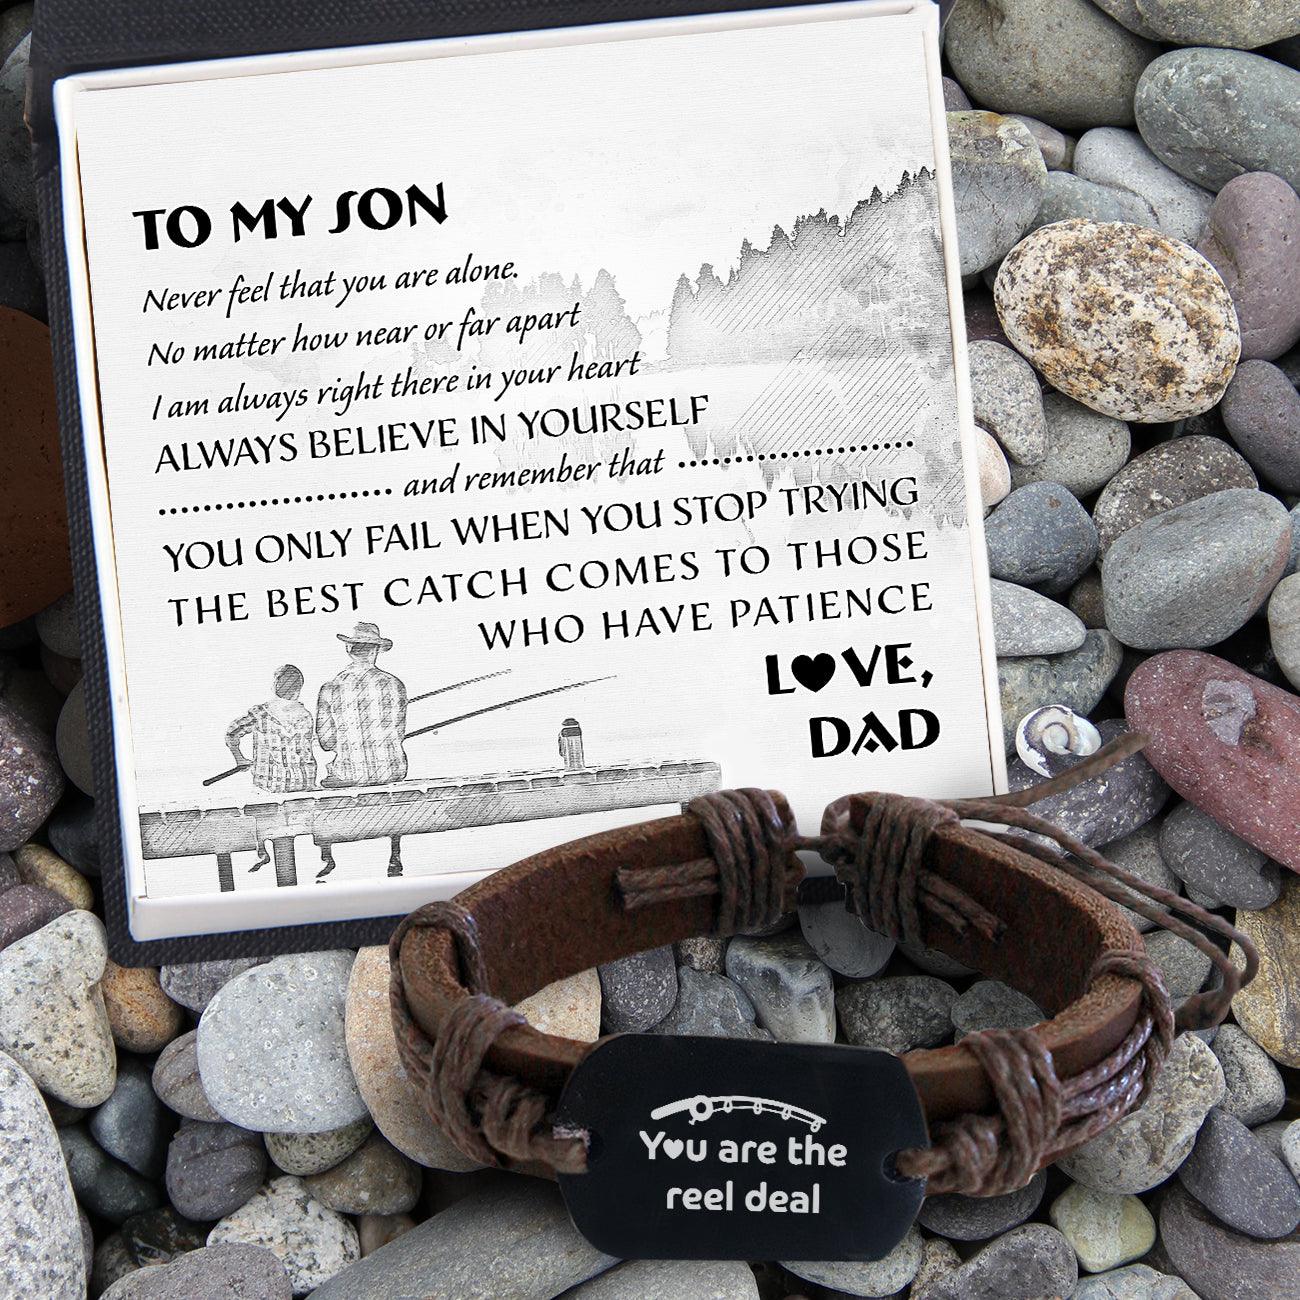 Leather Cord Bracelet - Fishing - From Dad - To My Son - Believe In Yourself - Augbr16002 - Gifts Holder